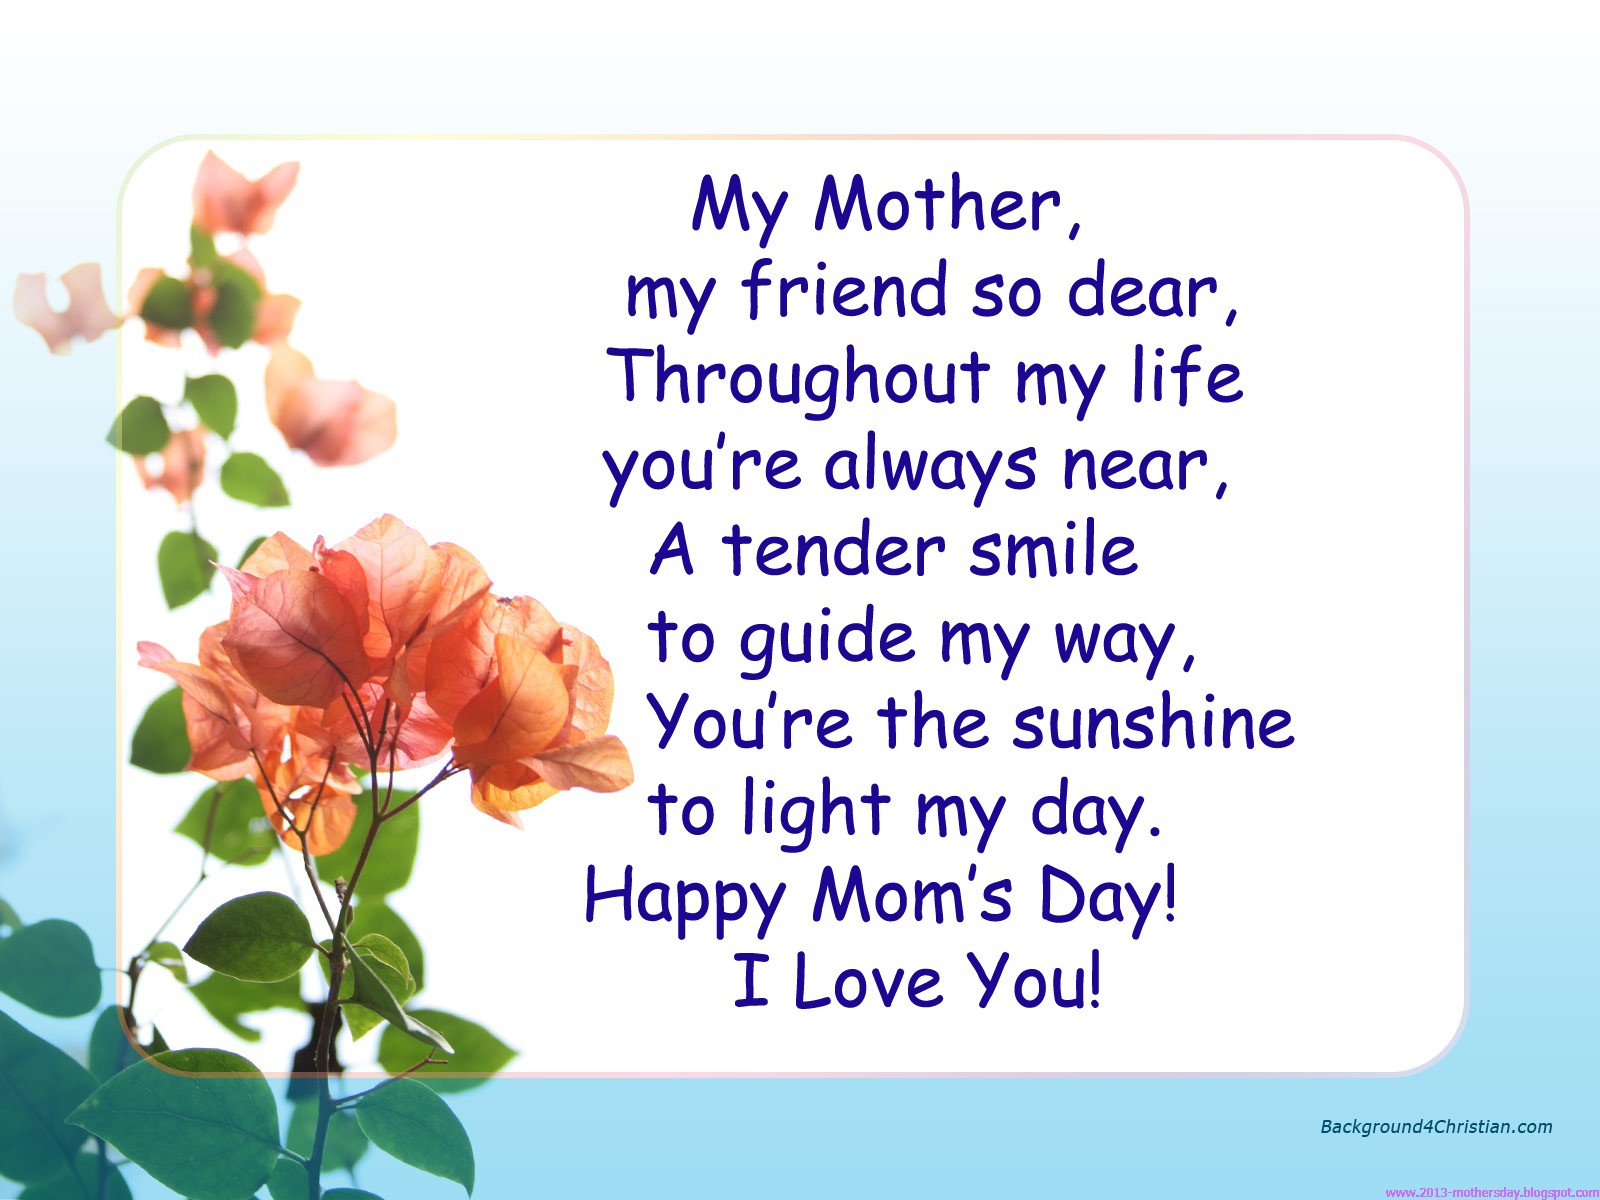 Wallpaper Free Download: Best Mothers Day Quotes And wishes Cards -2013